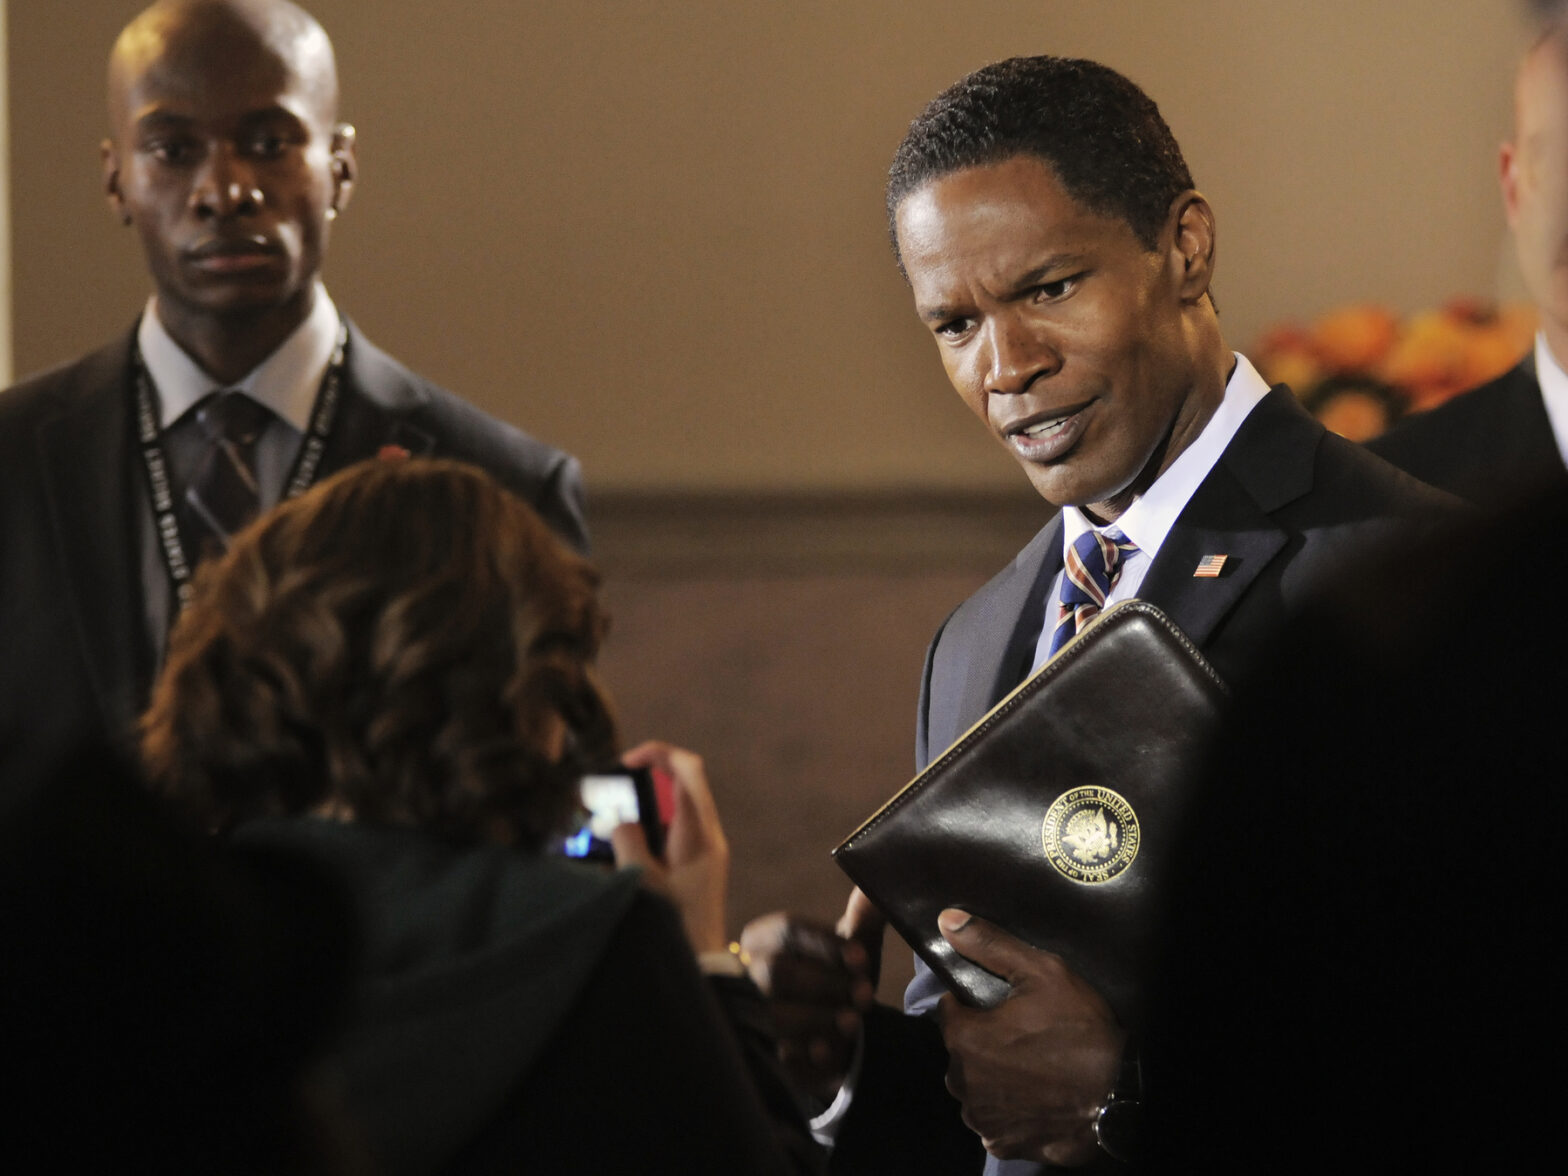 A Jamie Foxx Action Blockbuster Is Dominating On Streaming.